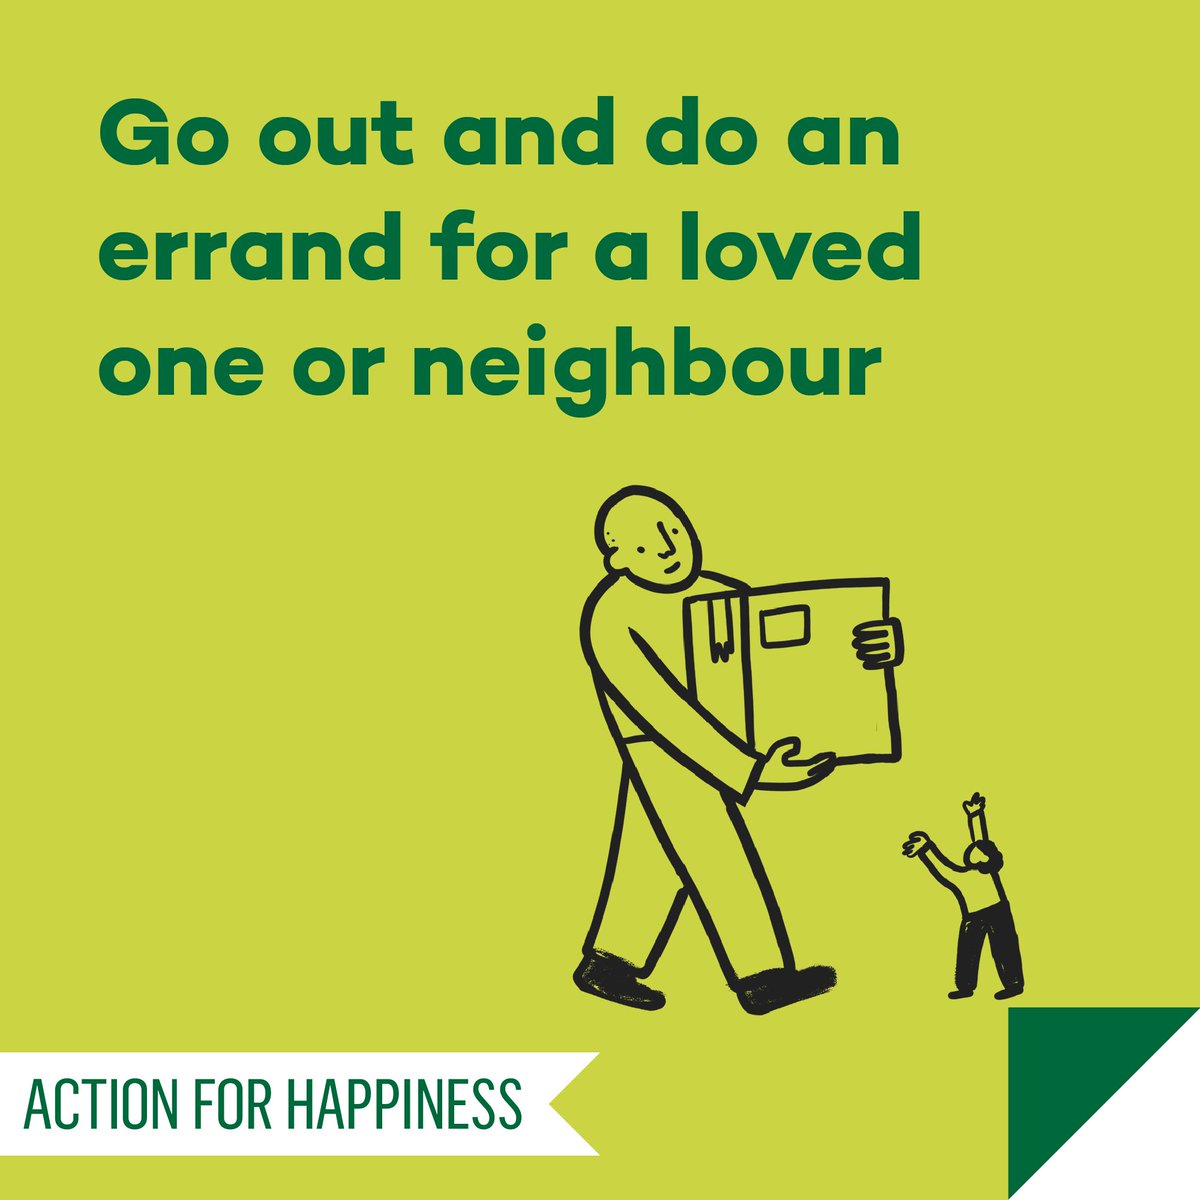 Active April - Day 23: Go out and do an errand for a loved one or neighbour actionforhappiness.org/active-april #ActiveApril